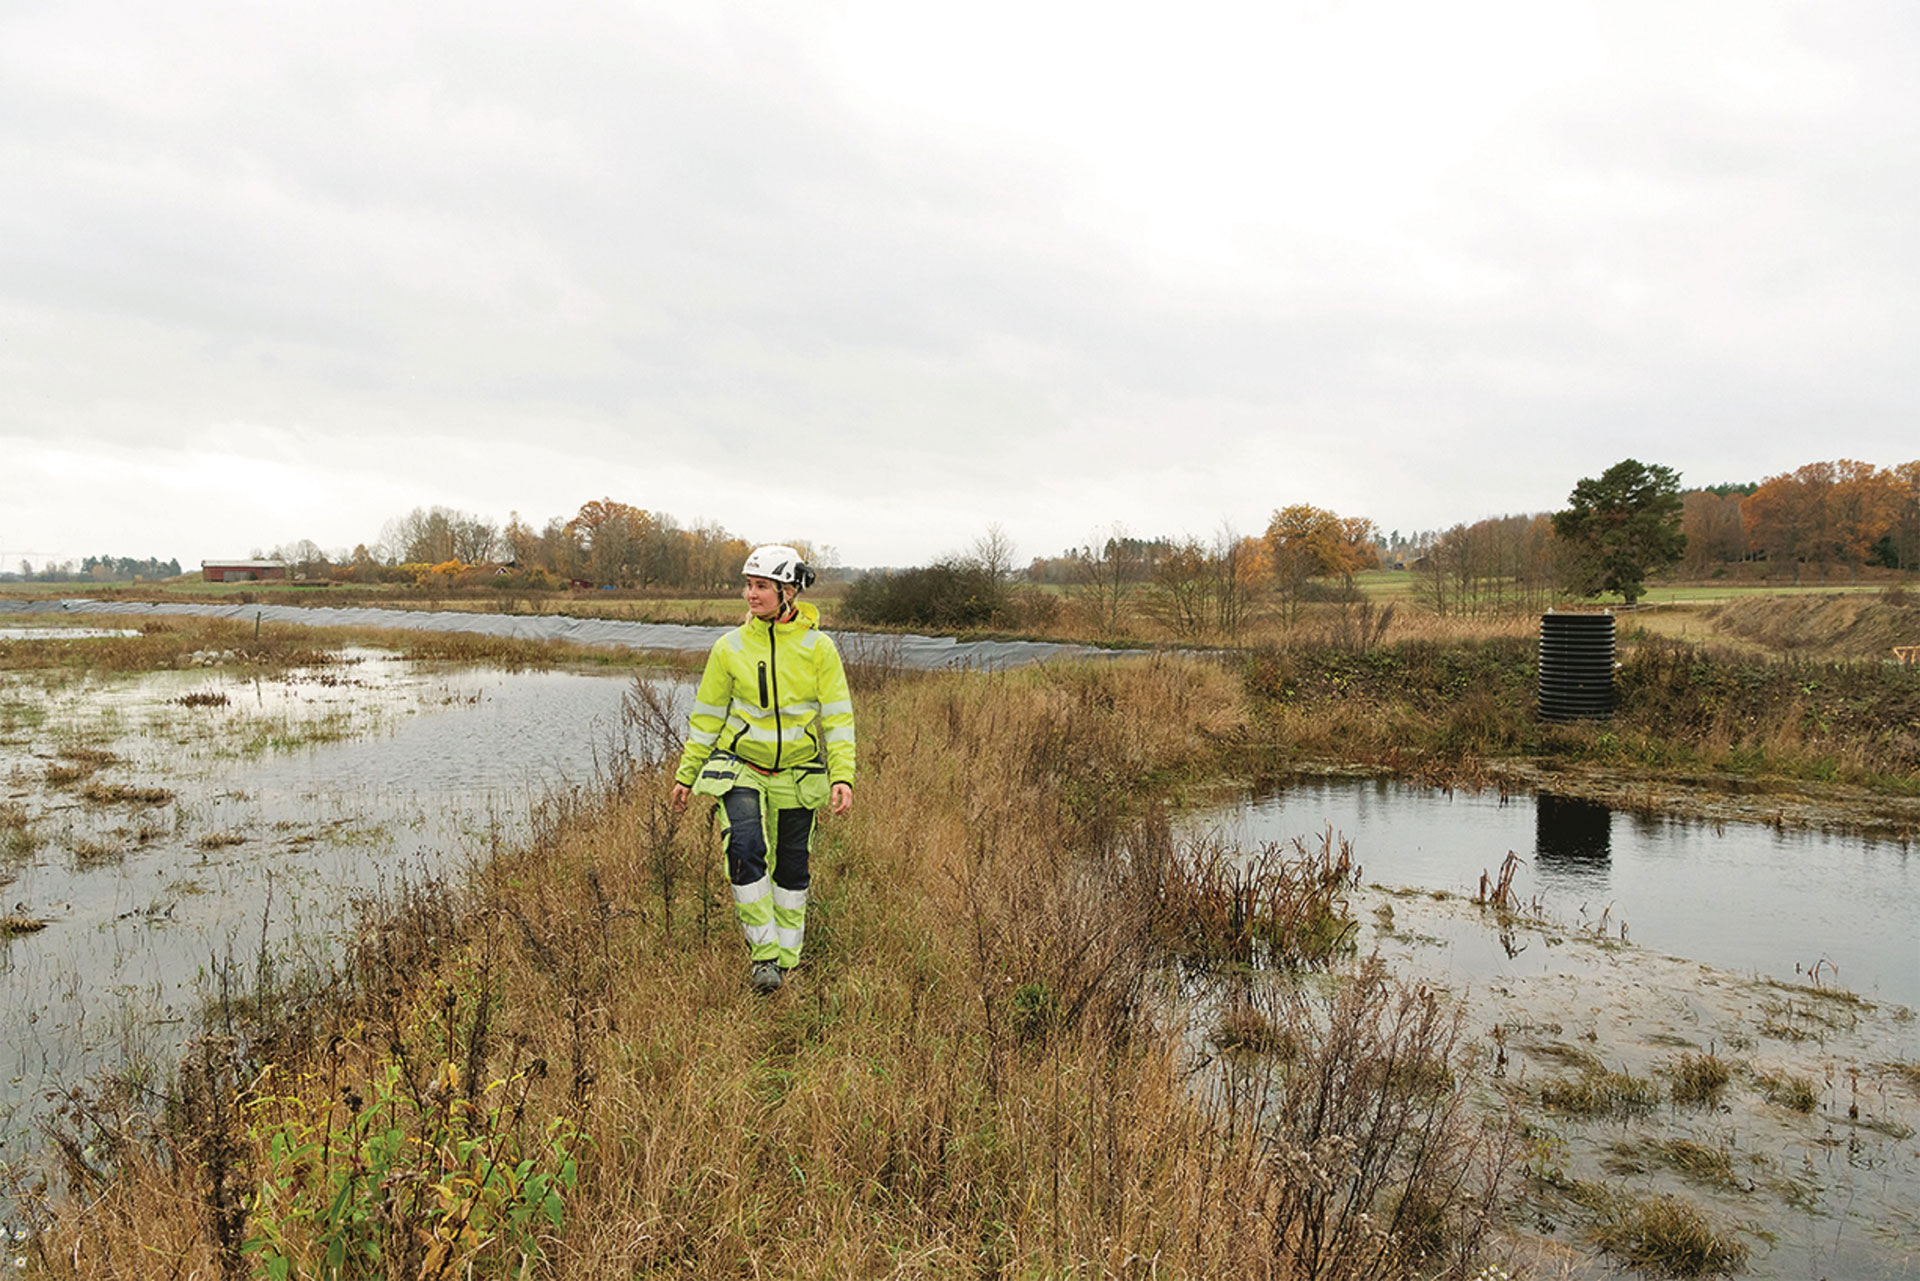 A person in protective equipment and a hard hat standing by a pond in a grassy field, with overcast skies above